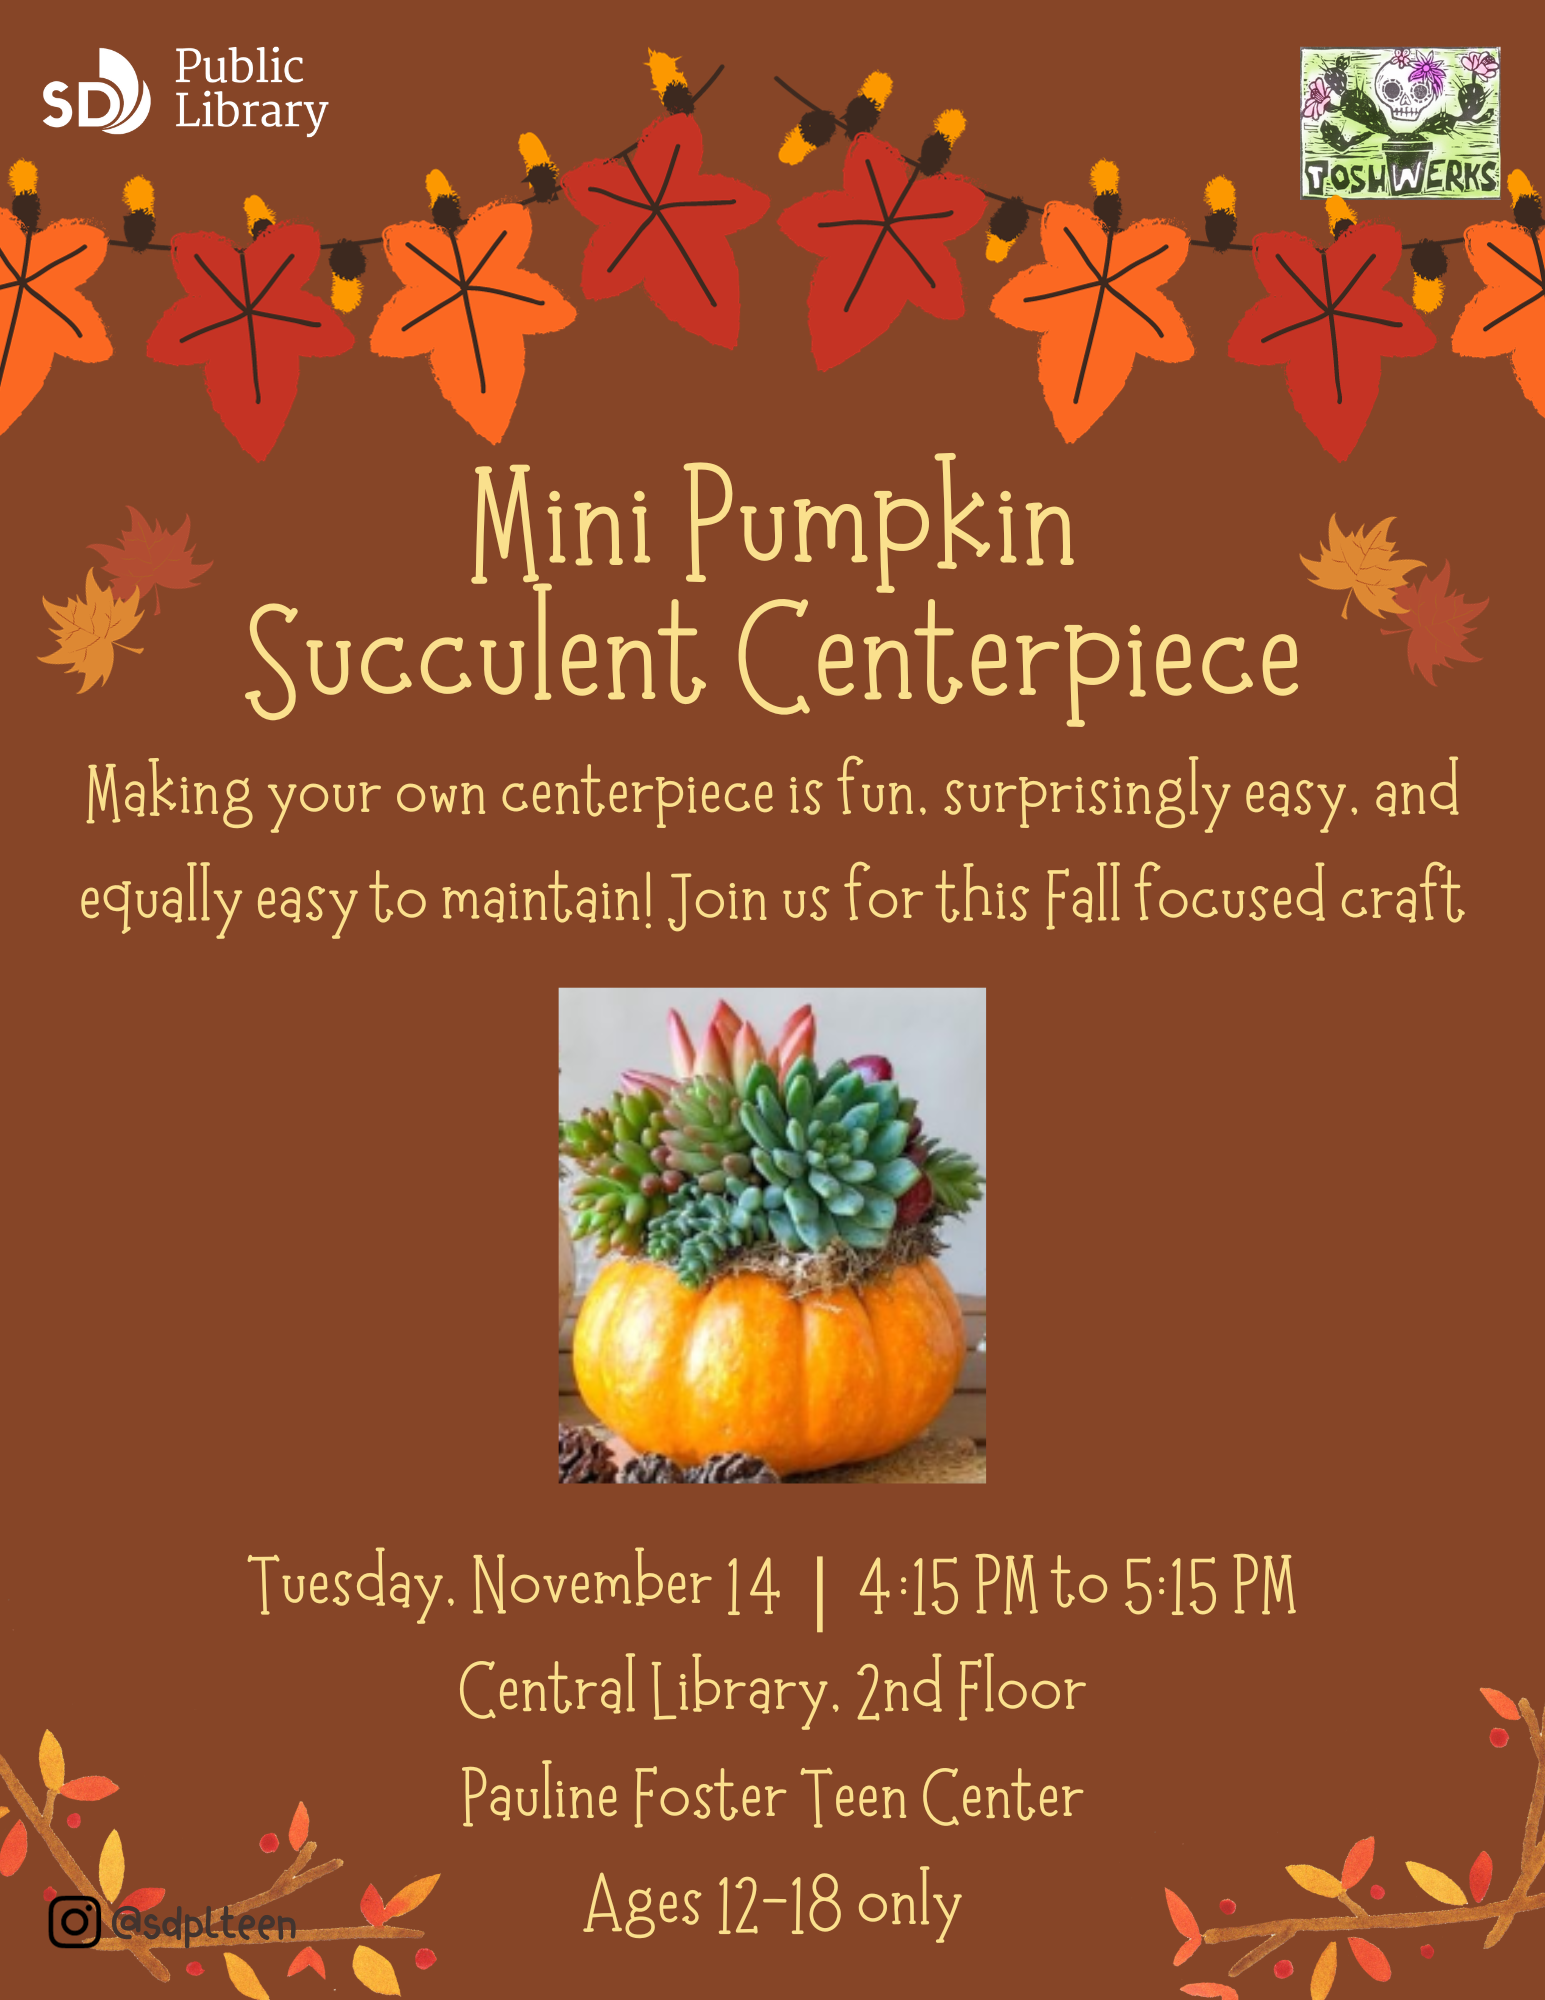 Mini Pumpkin Succulent Centerpiece. Making your own centerpiece is fun, surprisingly easy, and equally easy to maintain! Join us for this Fall focused craft. Tuesday, November 14. 4:15 PM to 5:15 PM Central Library, 2nd Floor, Pauline Foster Teen Center. Ages 12-18 only.